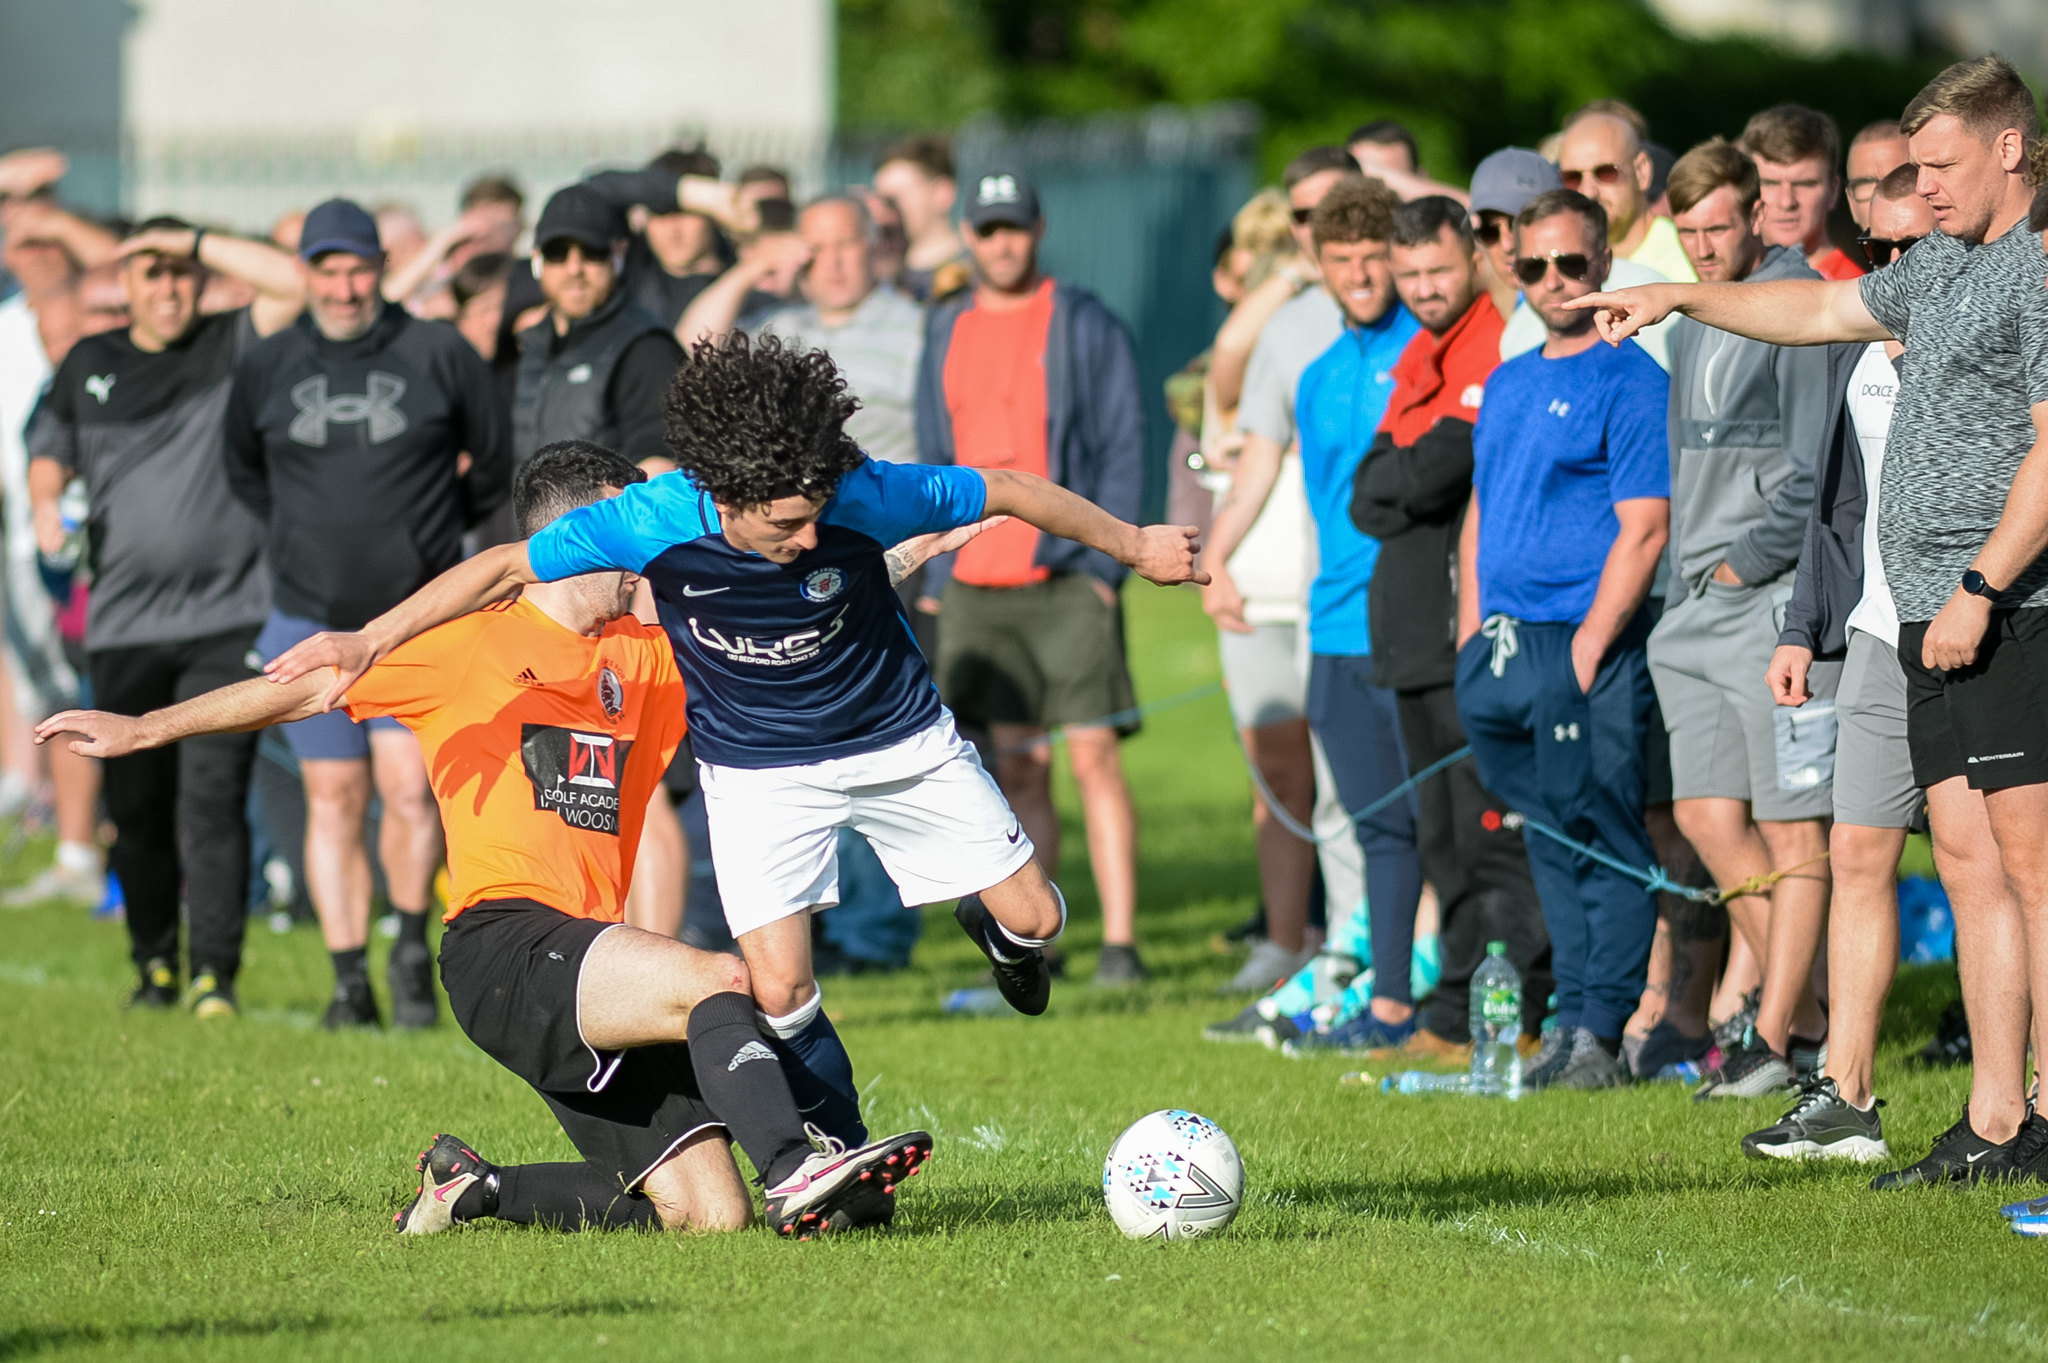 A huge crowd saw New Ferry Rangers face Rivacre FC in the Premier Cup semi-final. Last minute equaliser sparked wild scenes. Photos: Phil Bryan